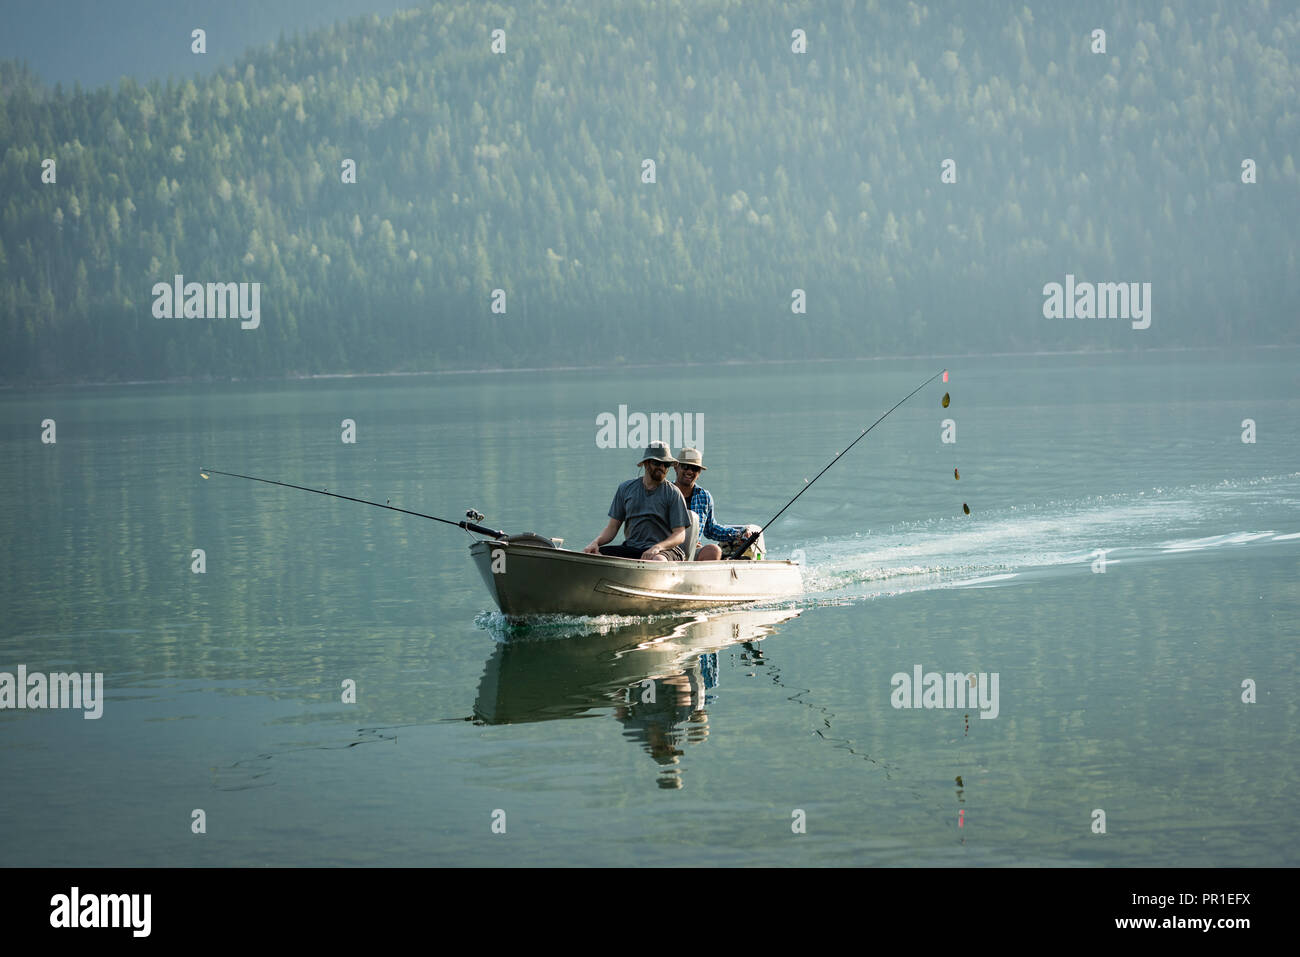 Two fishermen fishing in the river Stock Photo